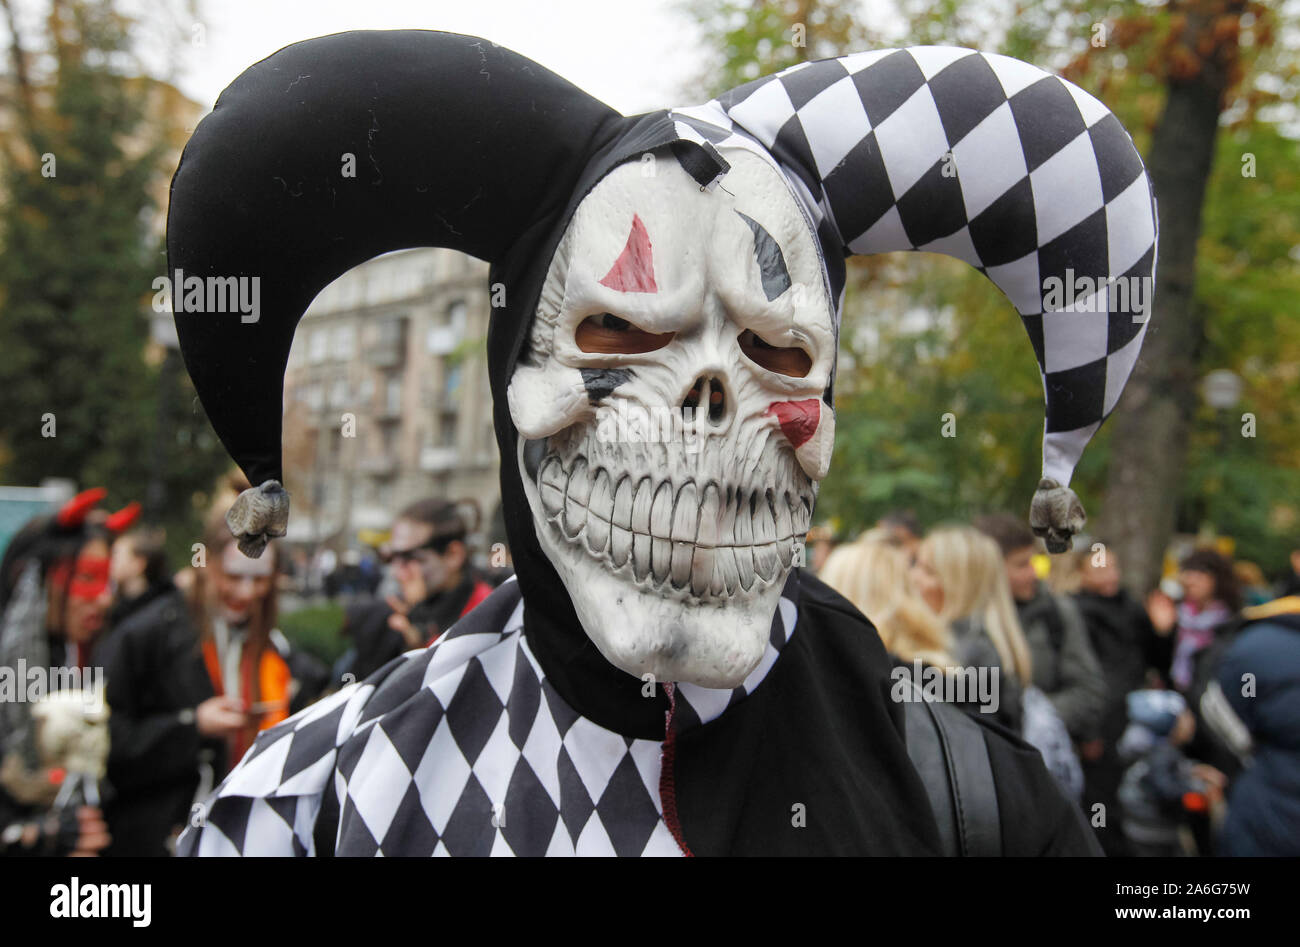 A participant wearing make-up and zombie costume attends the Halloween parade in Kiev.Hundreds of zombies staggered through the inner city in search of fresh brains during the Halloween Parade. Halloween is a holiday celebrated in the world on 31 October, the eve of the Western Christian feast of All Hallows' Day in which participants attend the Halloween costume parties, carving pumpkins into jack-o'-lanterns, lighting bonfires, apple bobbing, playing pranks, tell scary stories and watch horror films. Stock Photo